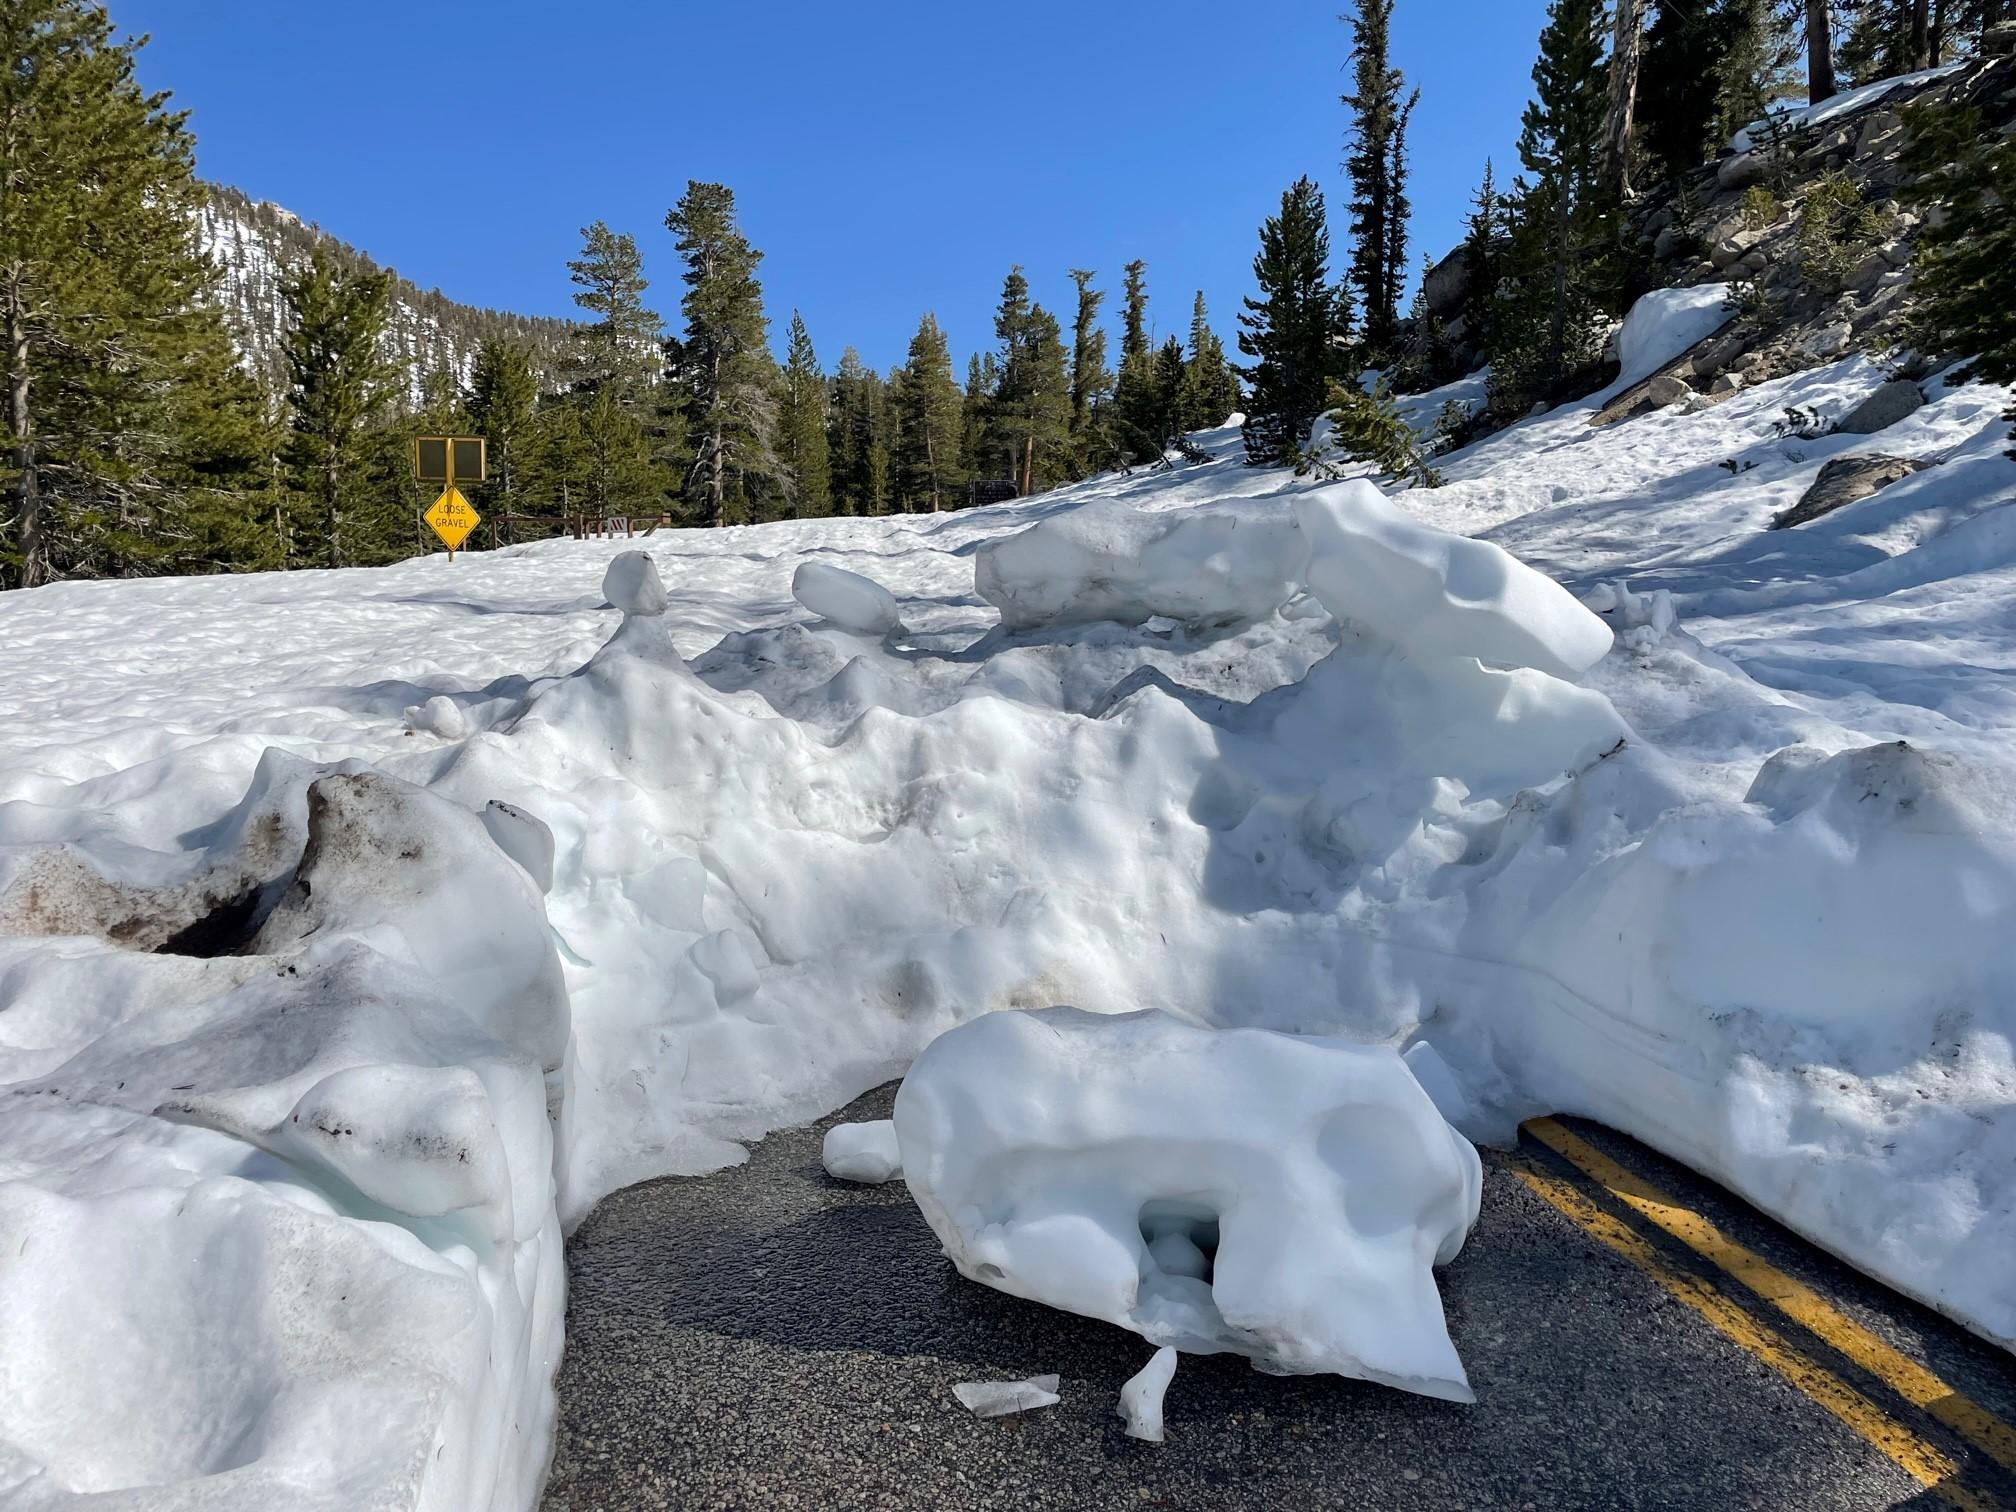 Image taken May 29 of closed road to Horseshoe Meadows (Cottonwood Lakes/Pass Access) at Forest Service gate at 9,800 ft. There is 4 feet of snow coverage and is close to the campgrounds. The road is still closed by the county.